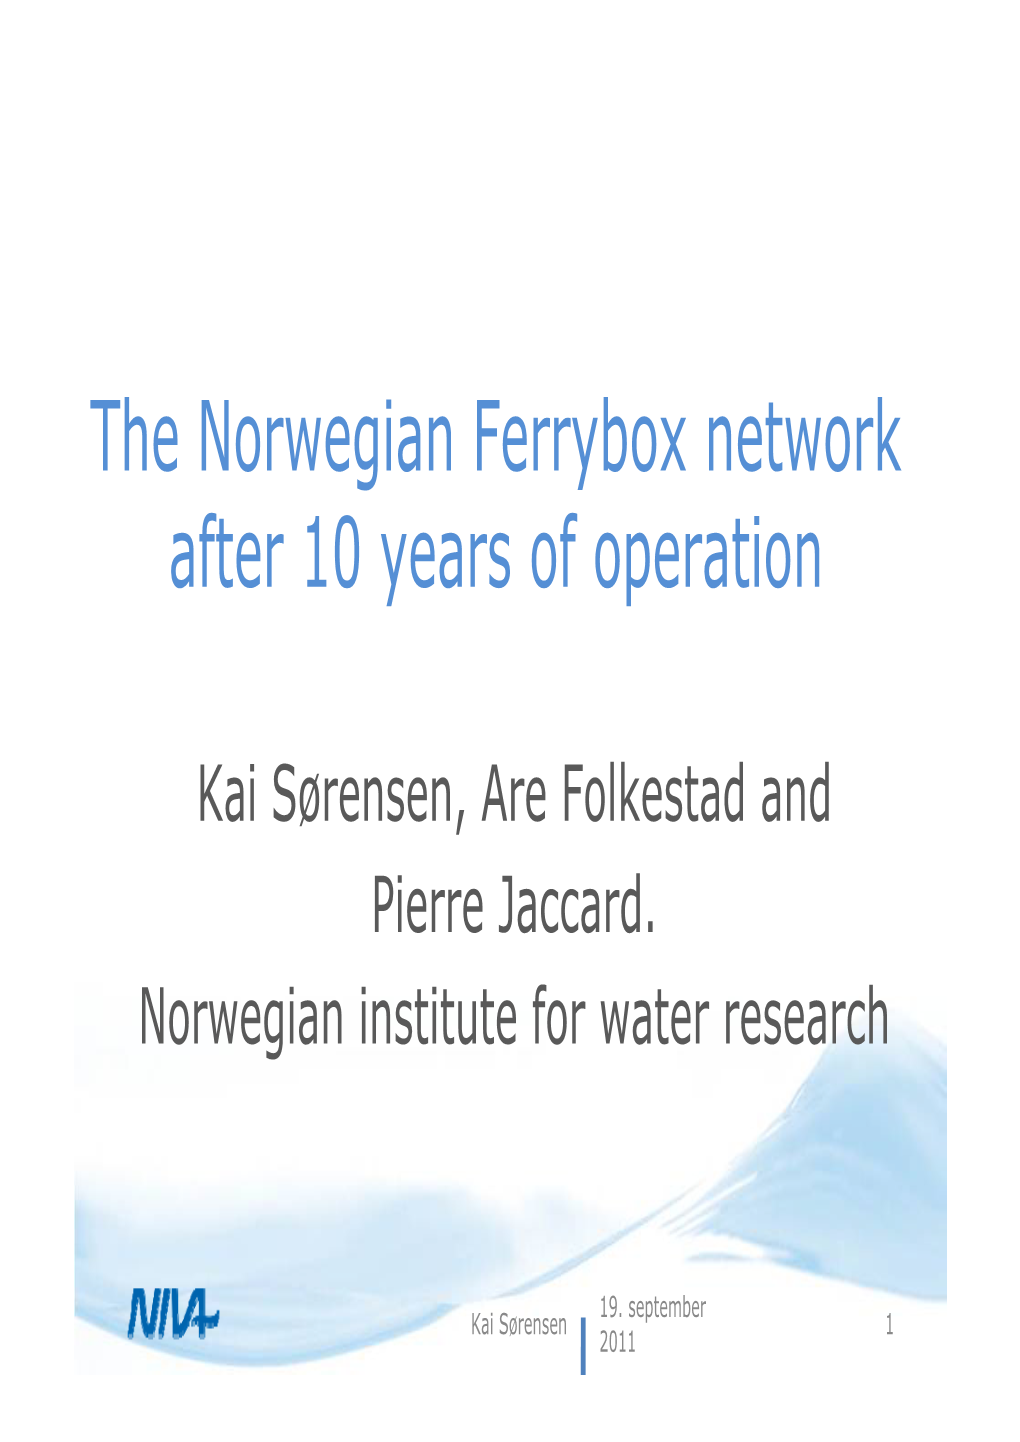 The Norwegian Ferrybox Network After 10 Years of Operation